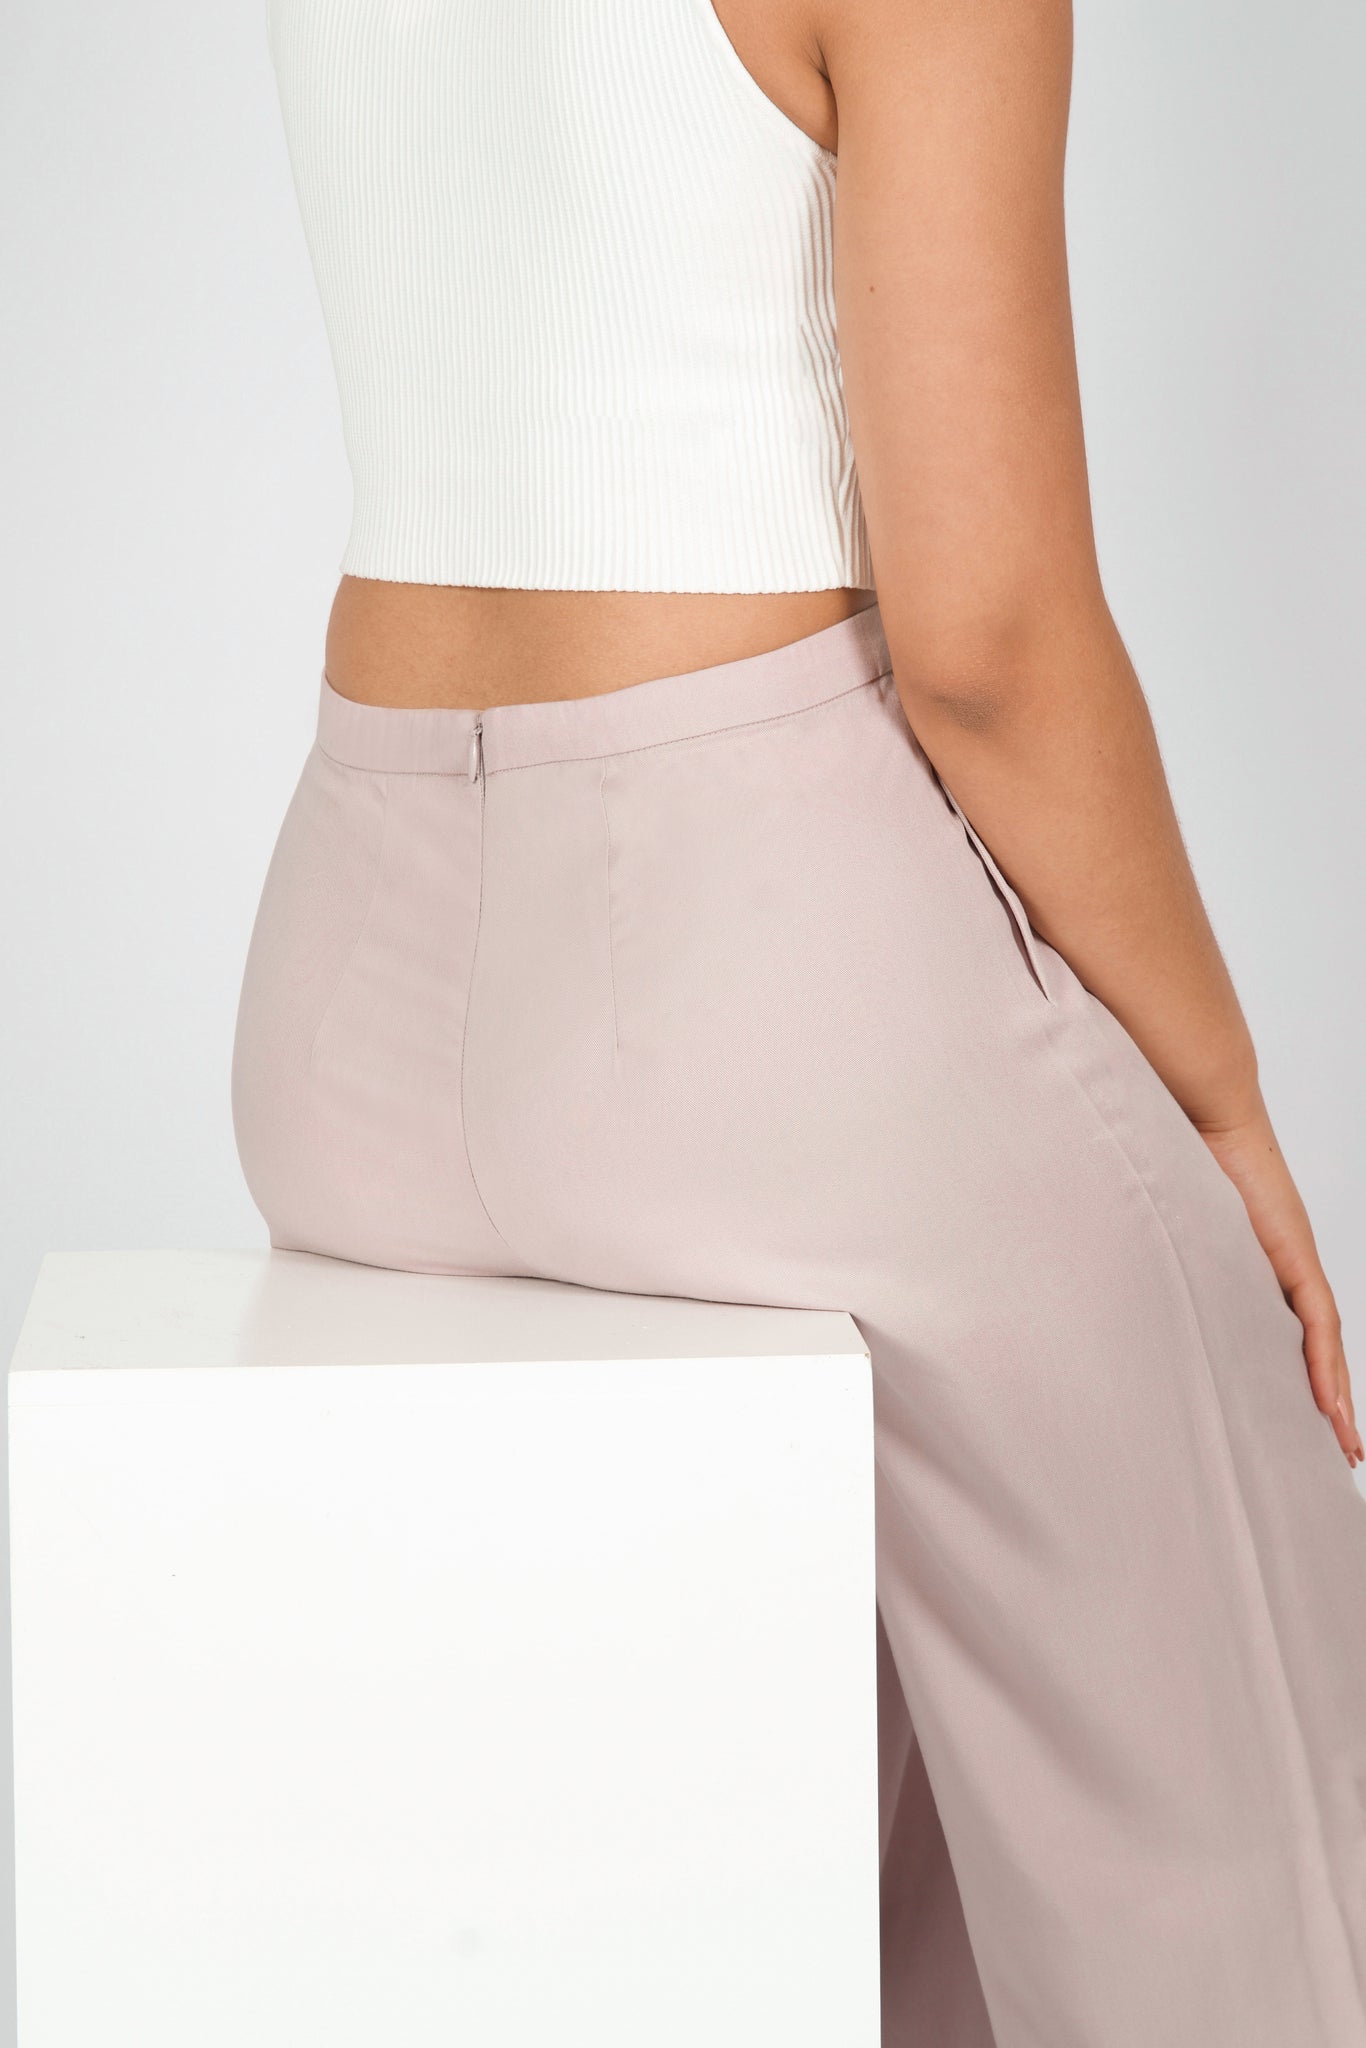 The Wide Leg Pant by Aam is designed specifically for women with full hips and thighs, so that when you sit, there is no waist gap.